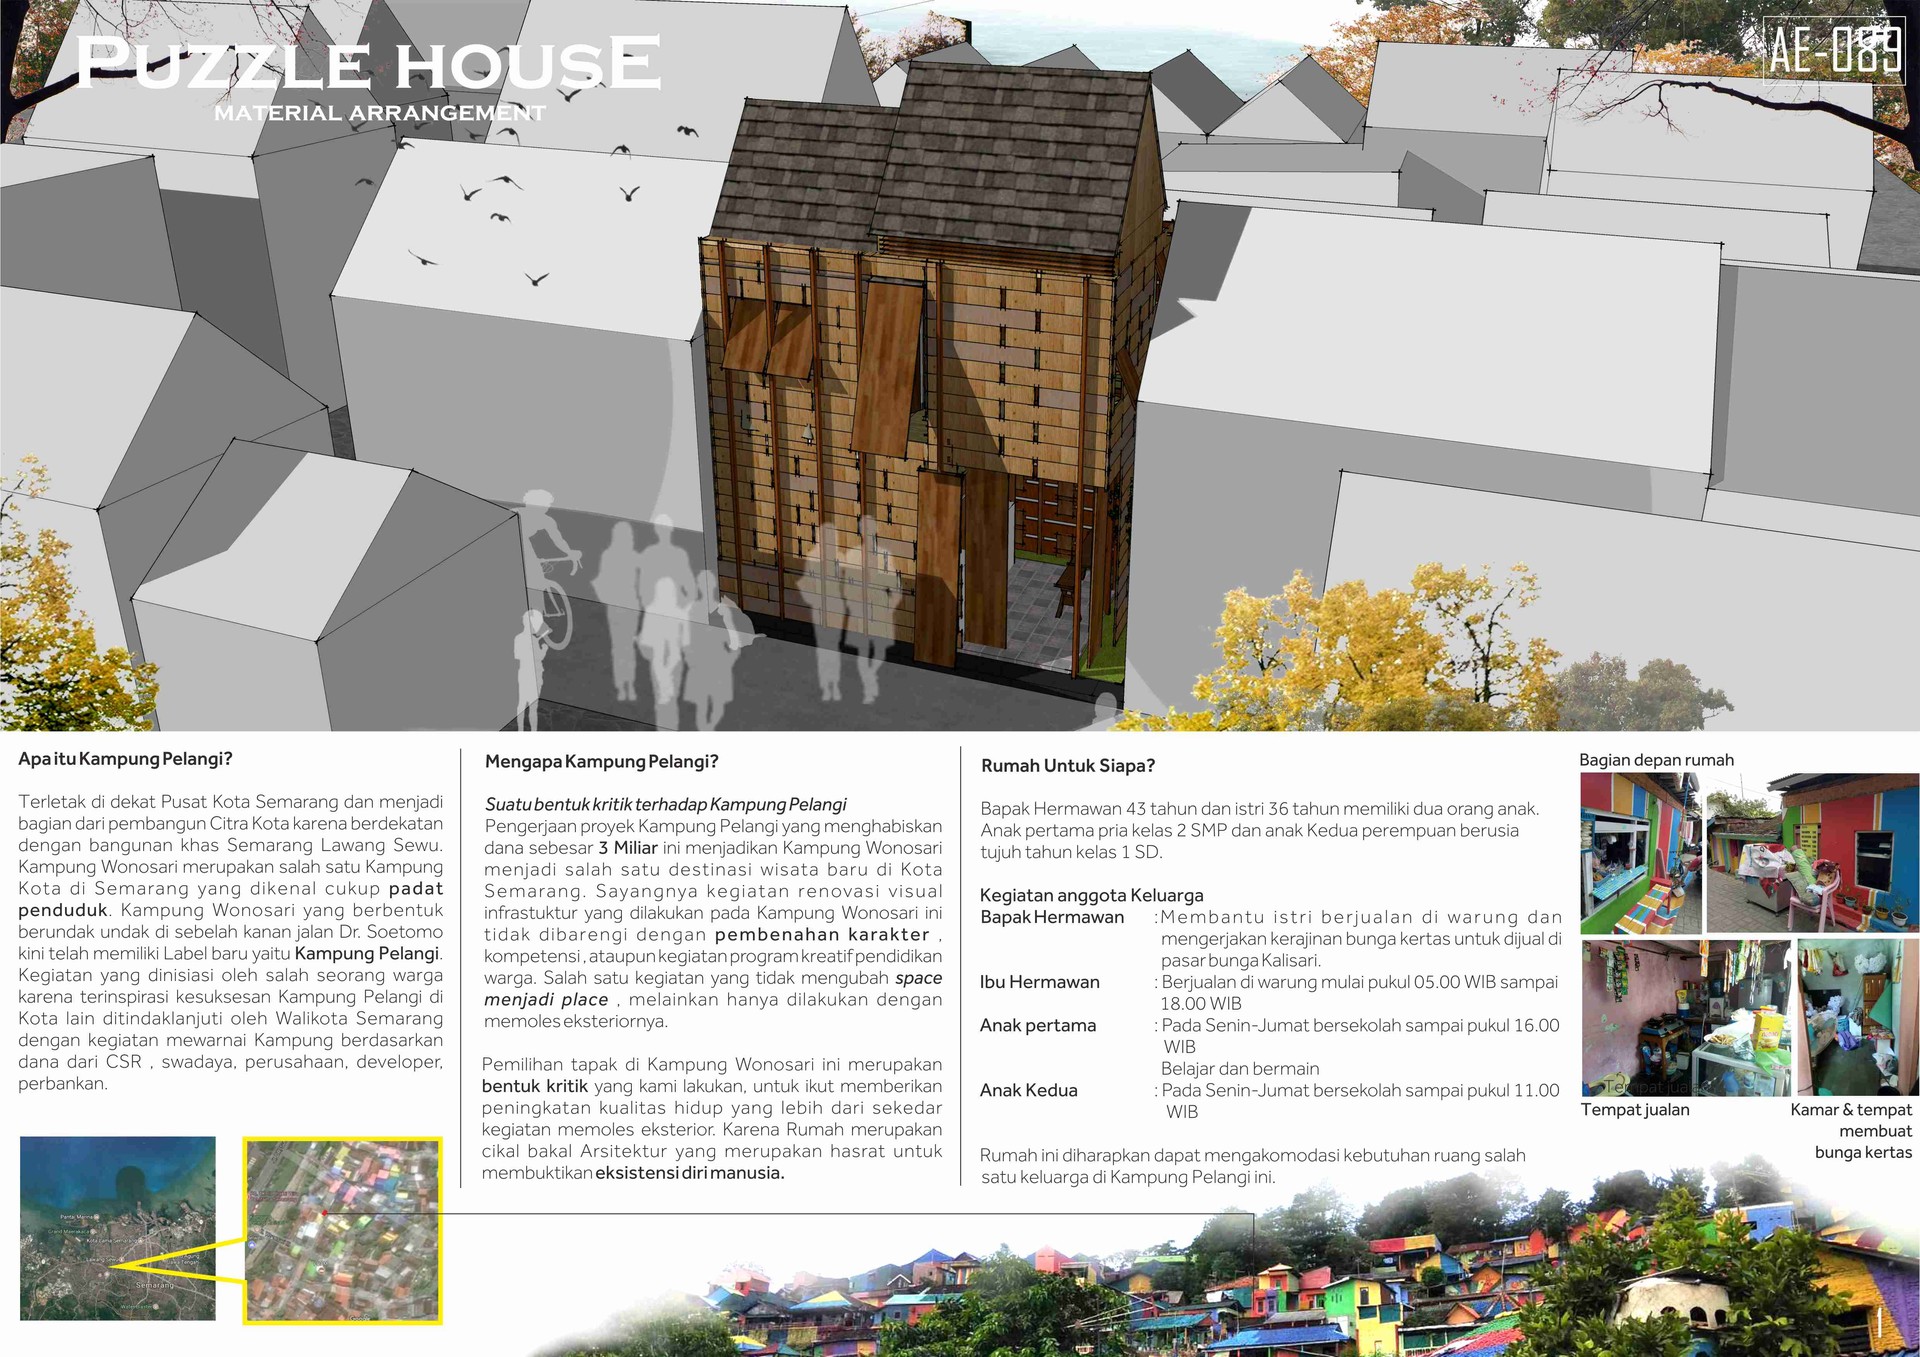 Design of MicroHouse National petition